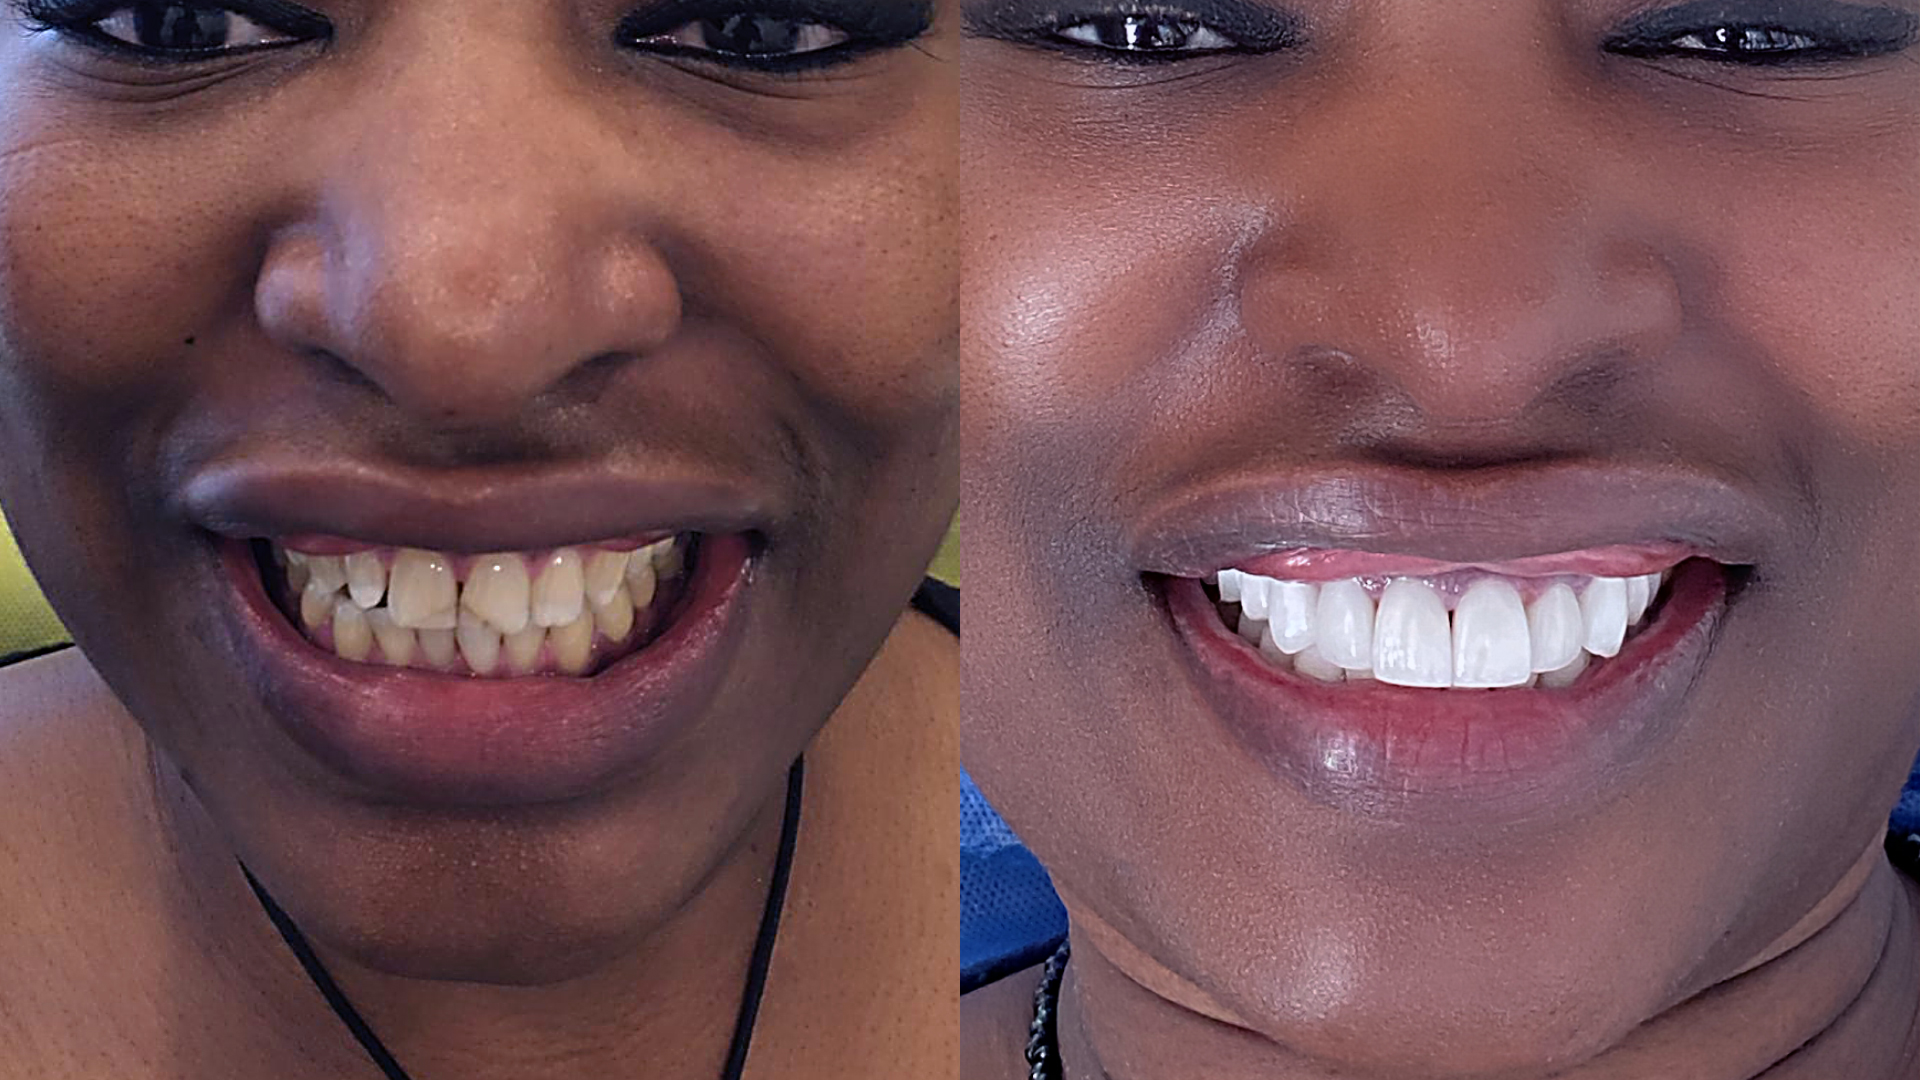 The results of a Hollywood Smile also called Smile Infinity.